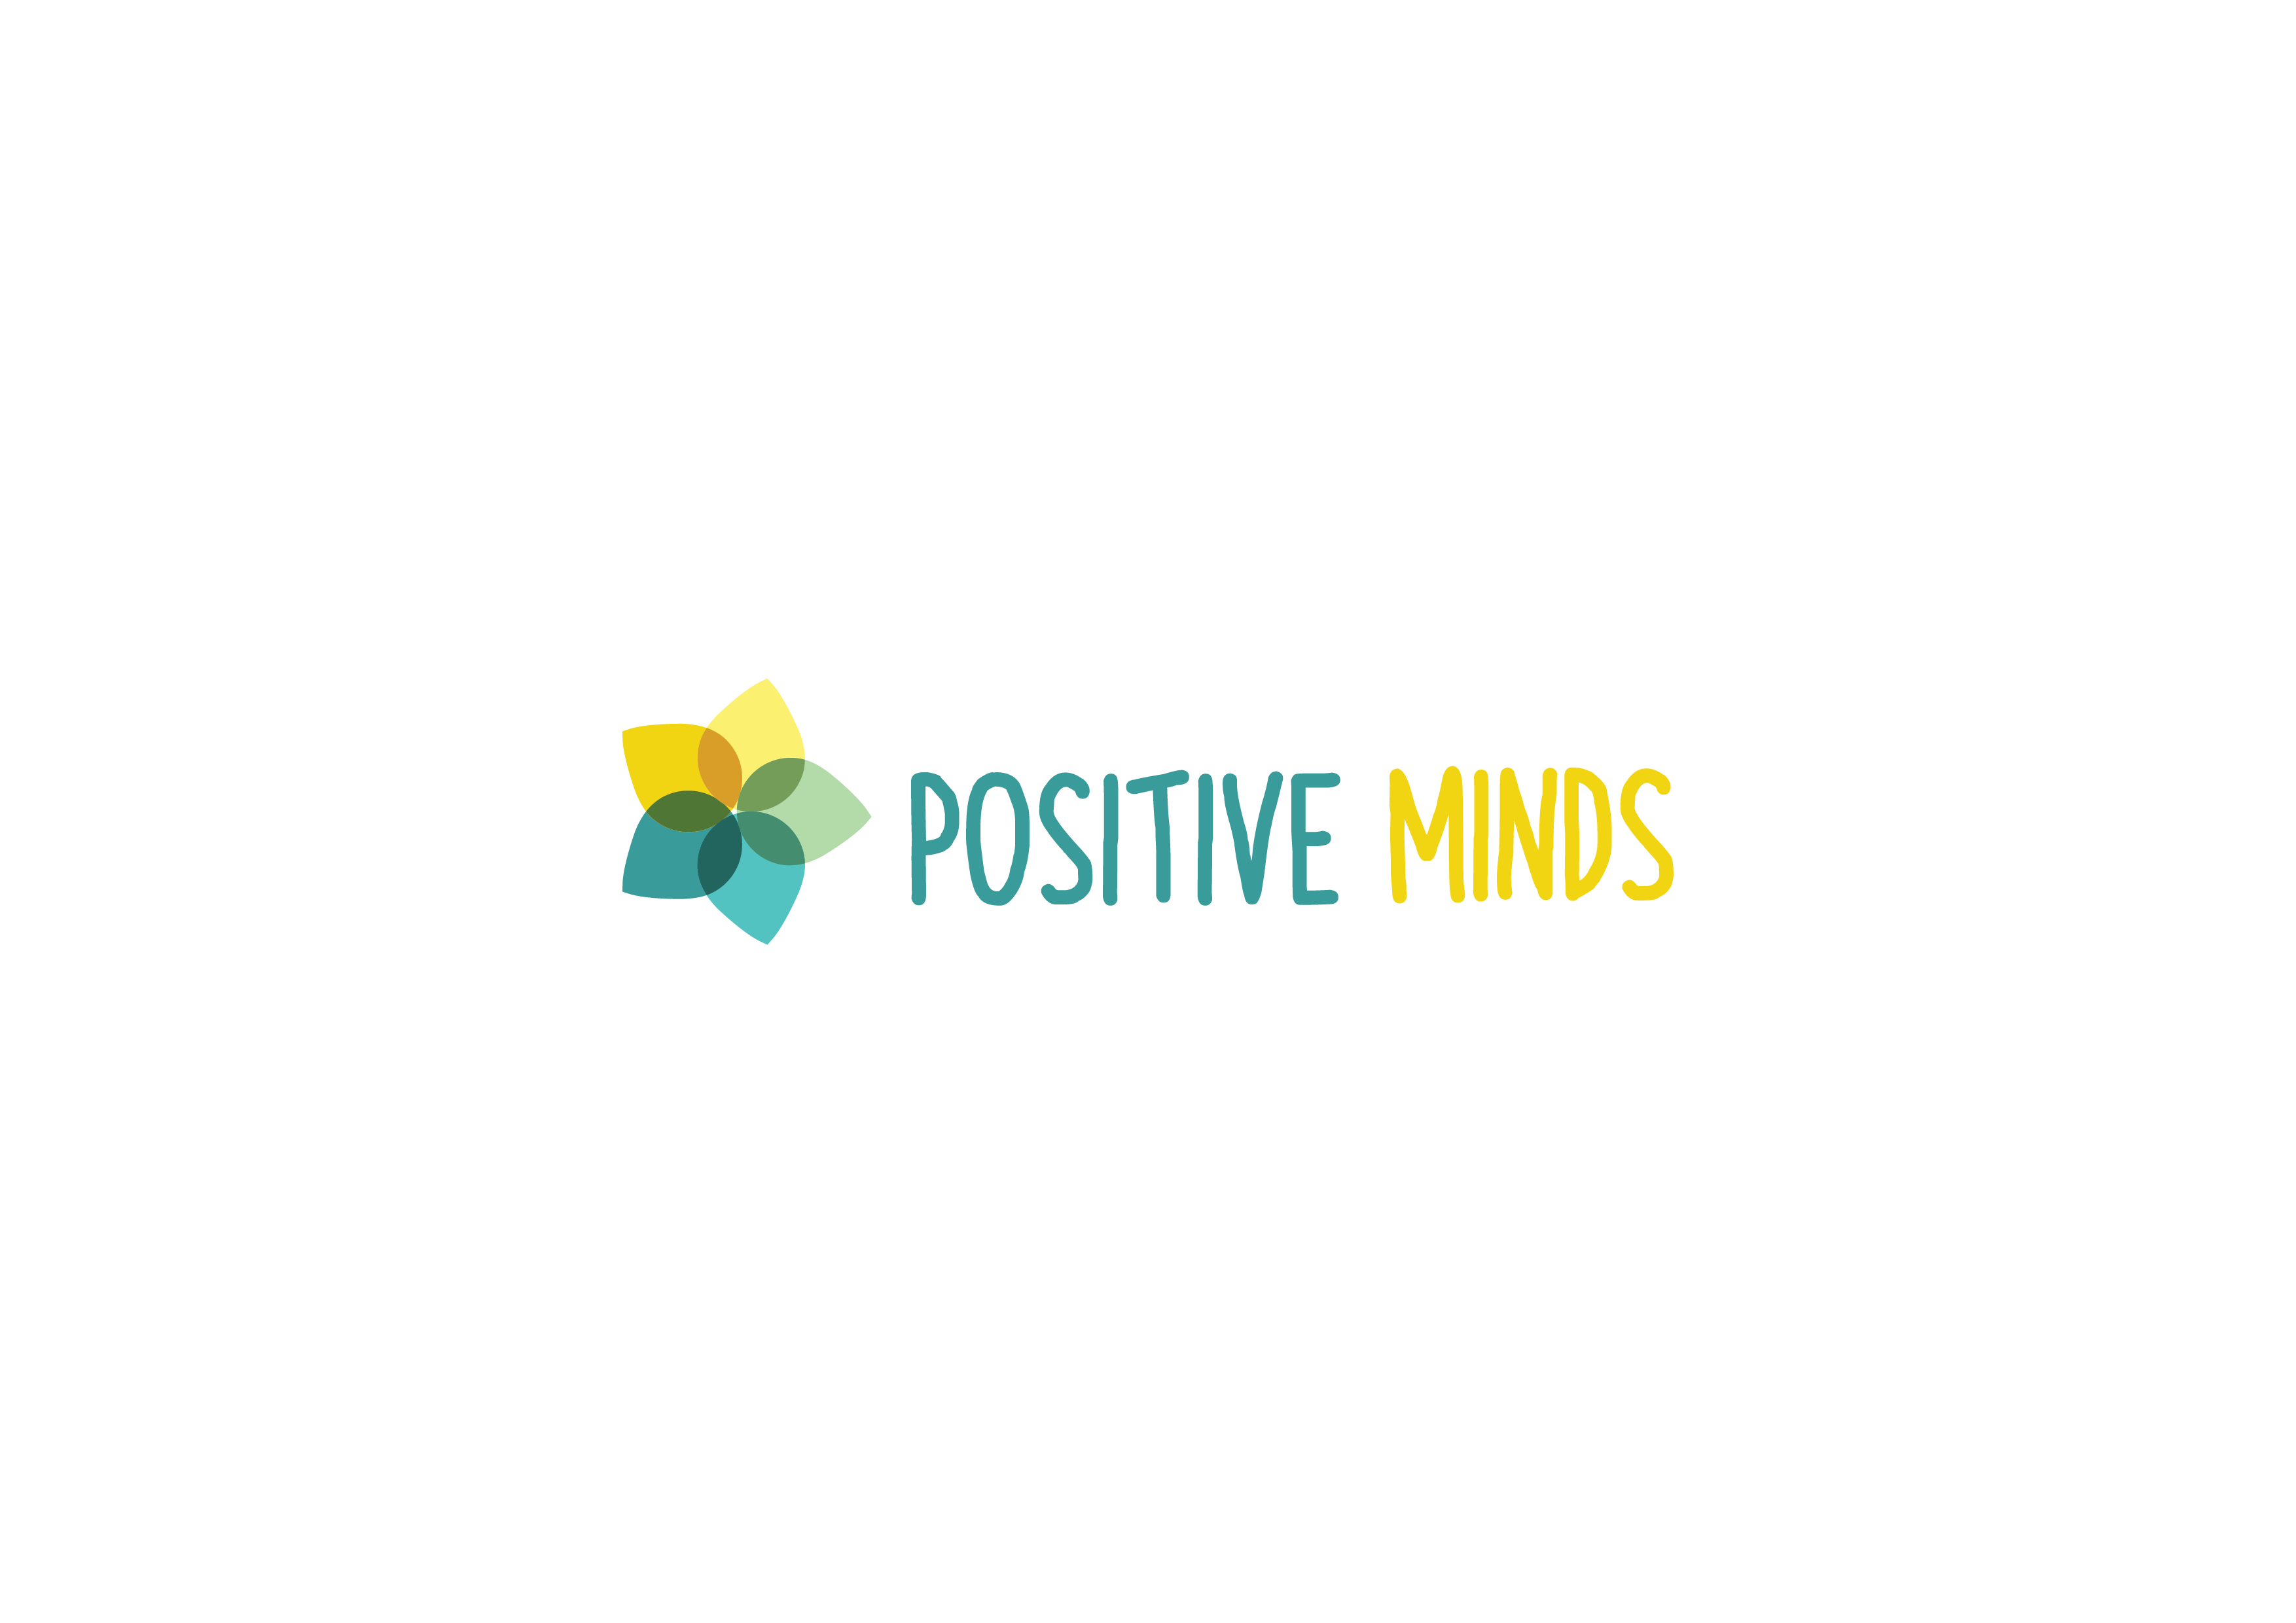 positiveMinds logo philosophy for children and youth